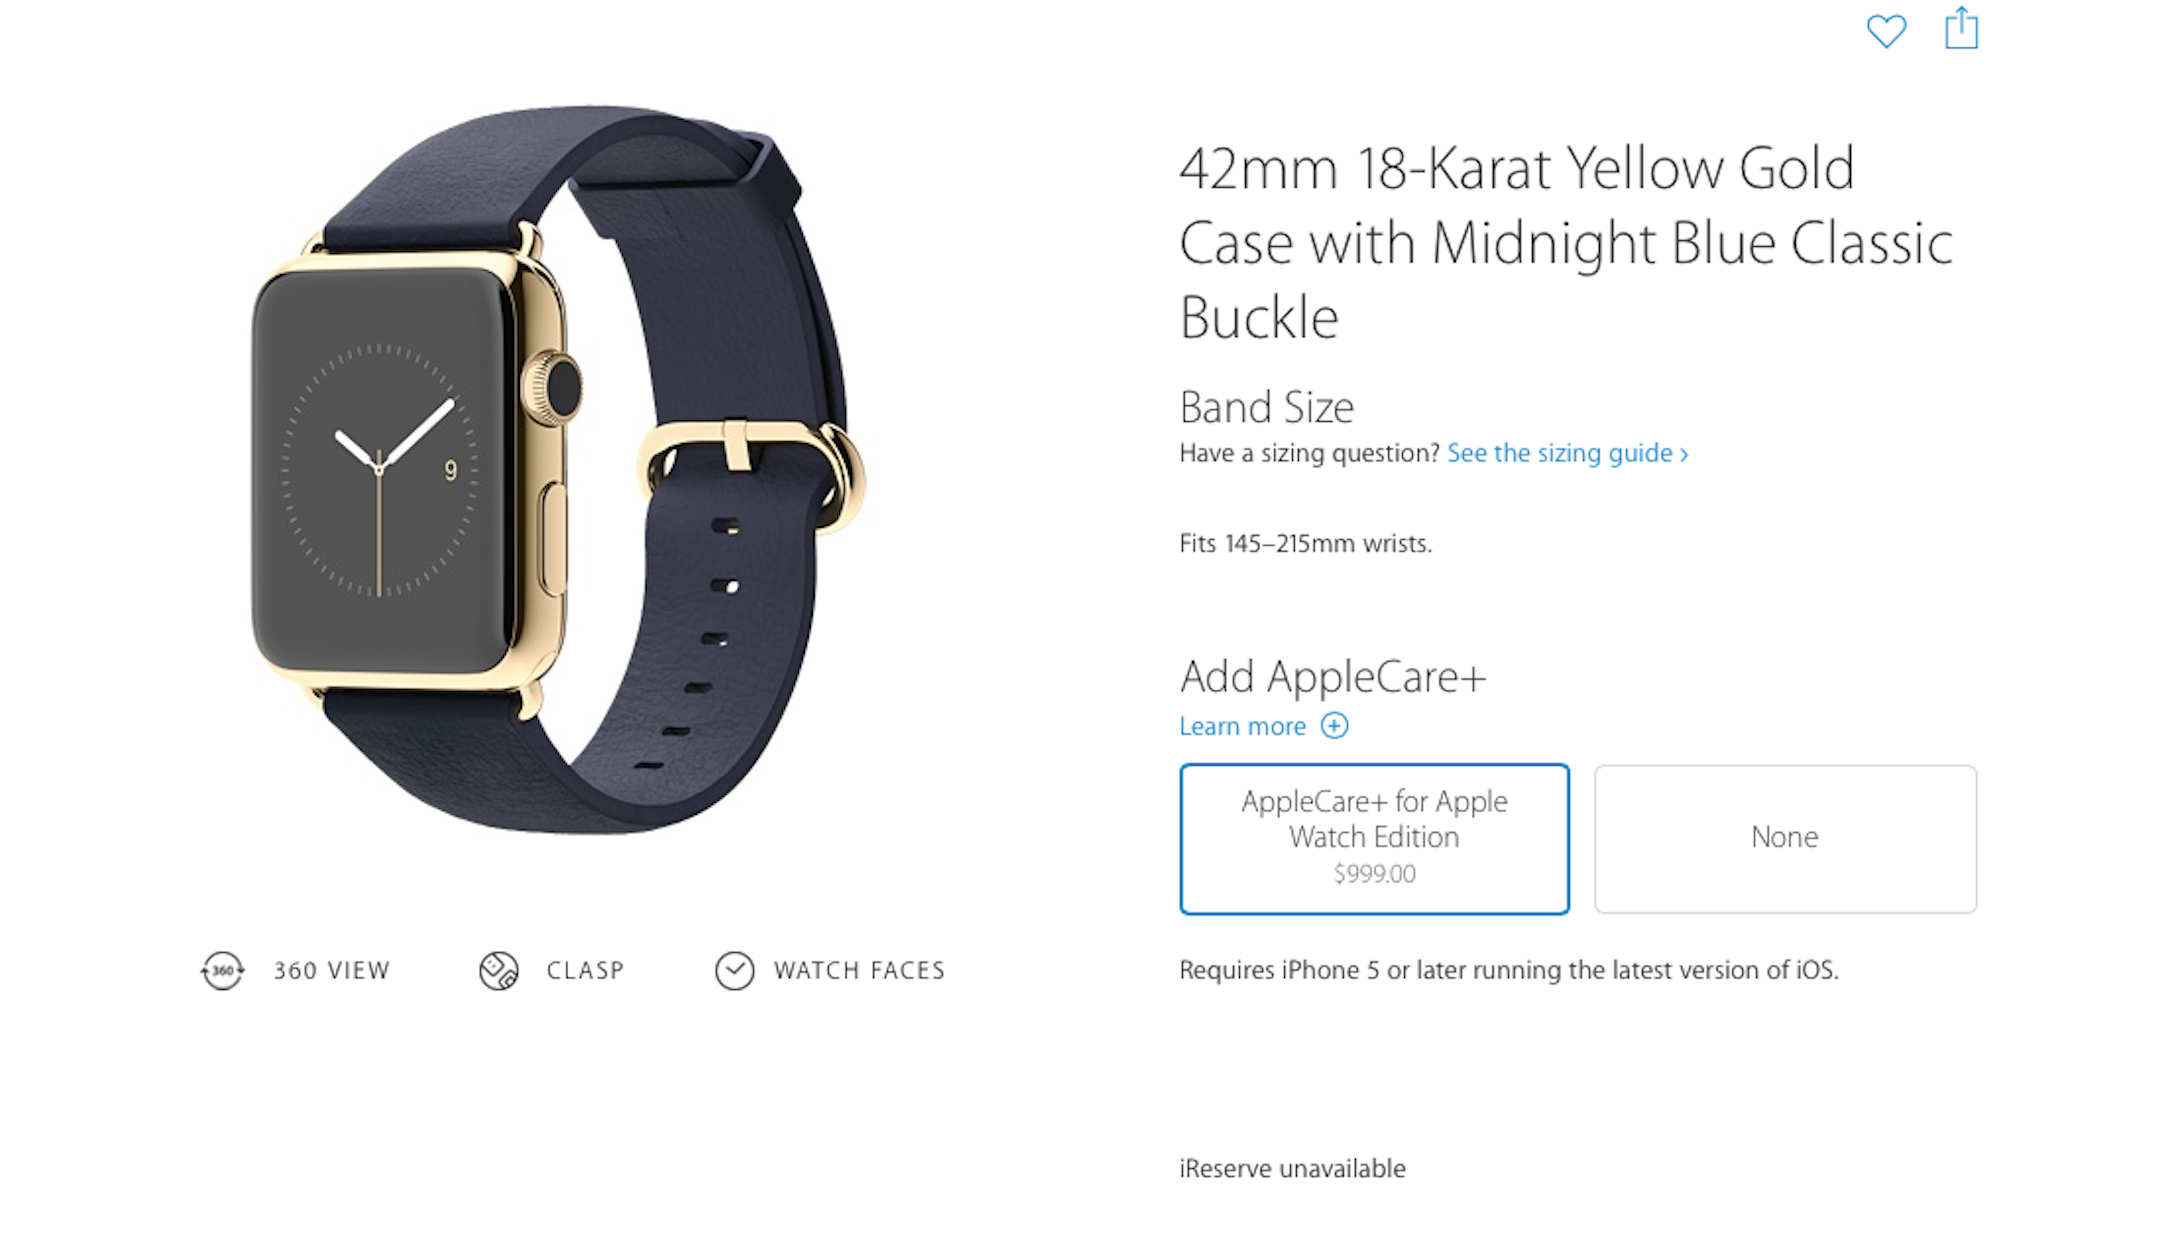 AppleCare+ for Apple Watch: $999 for Edition, $79 for Watch, $59 